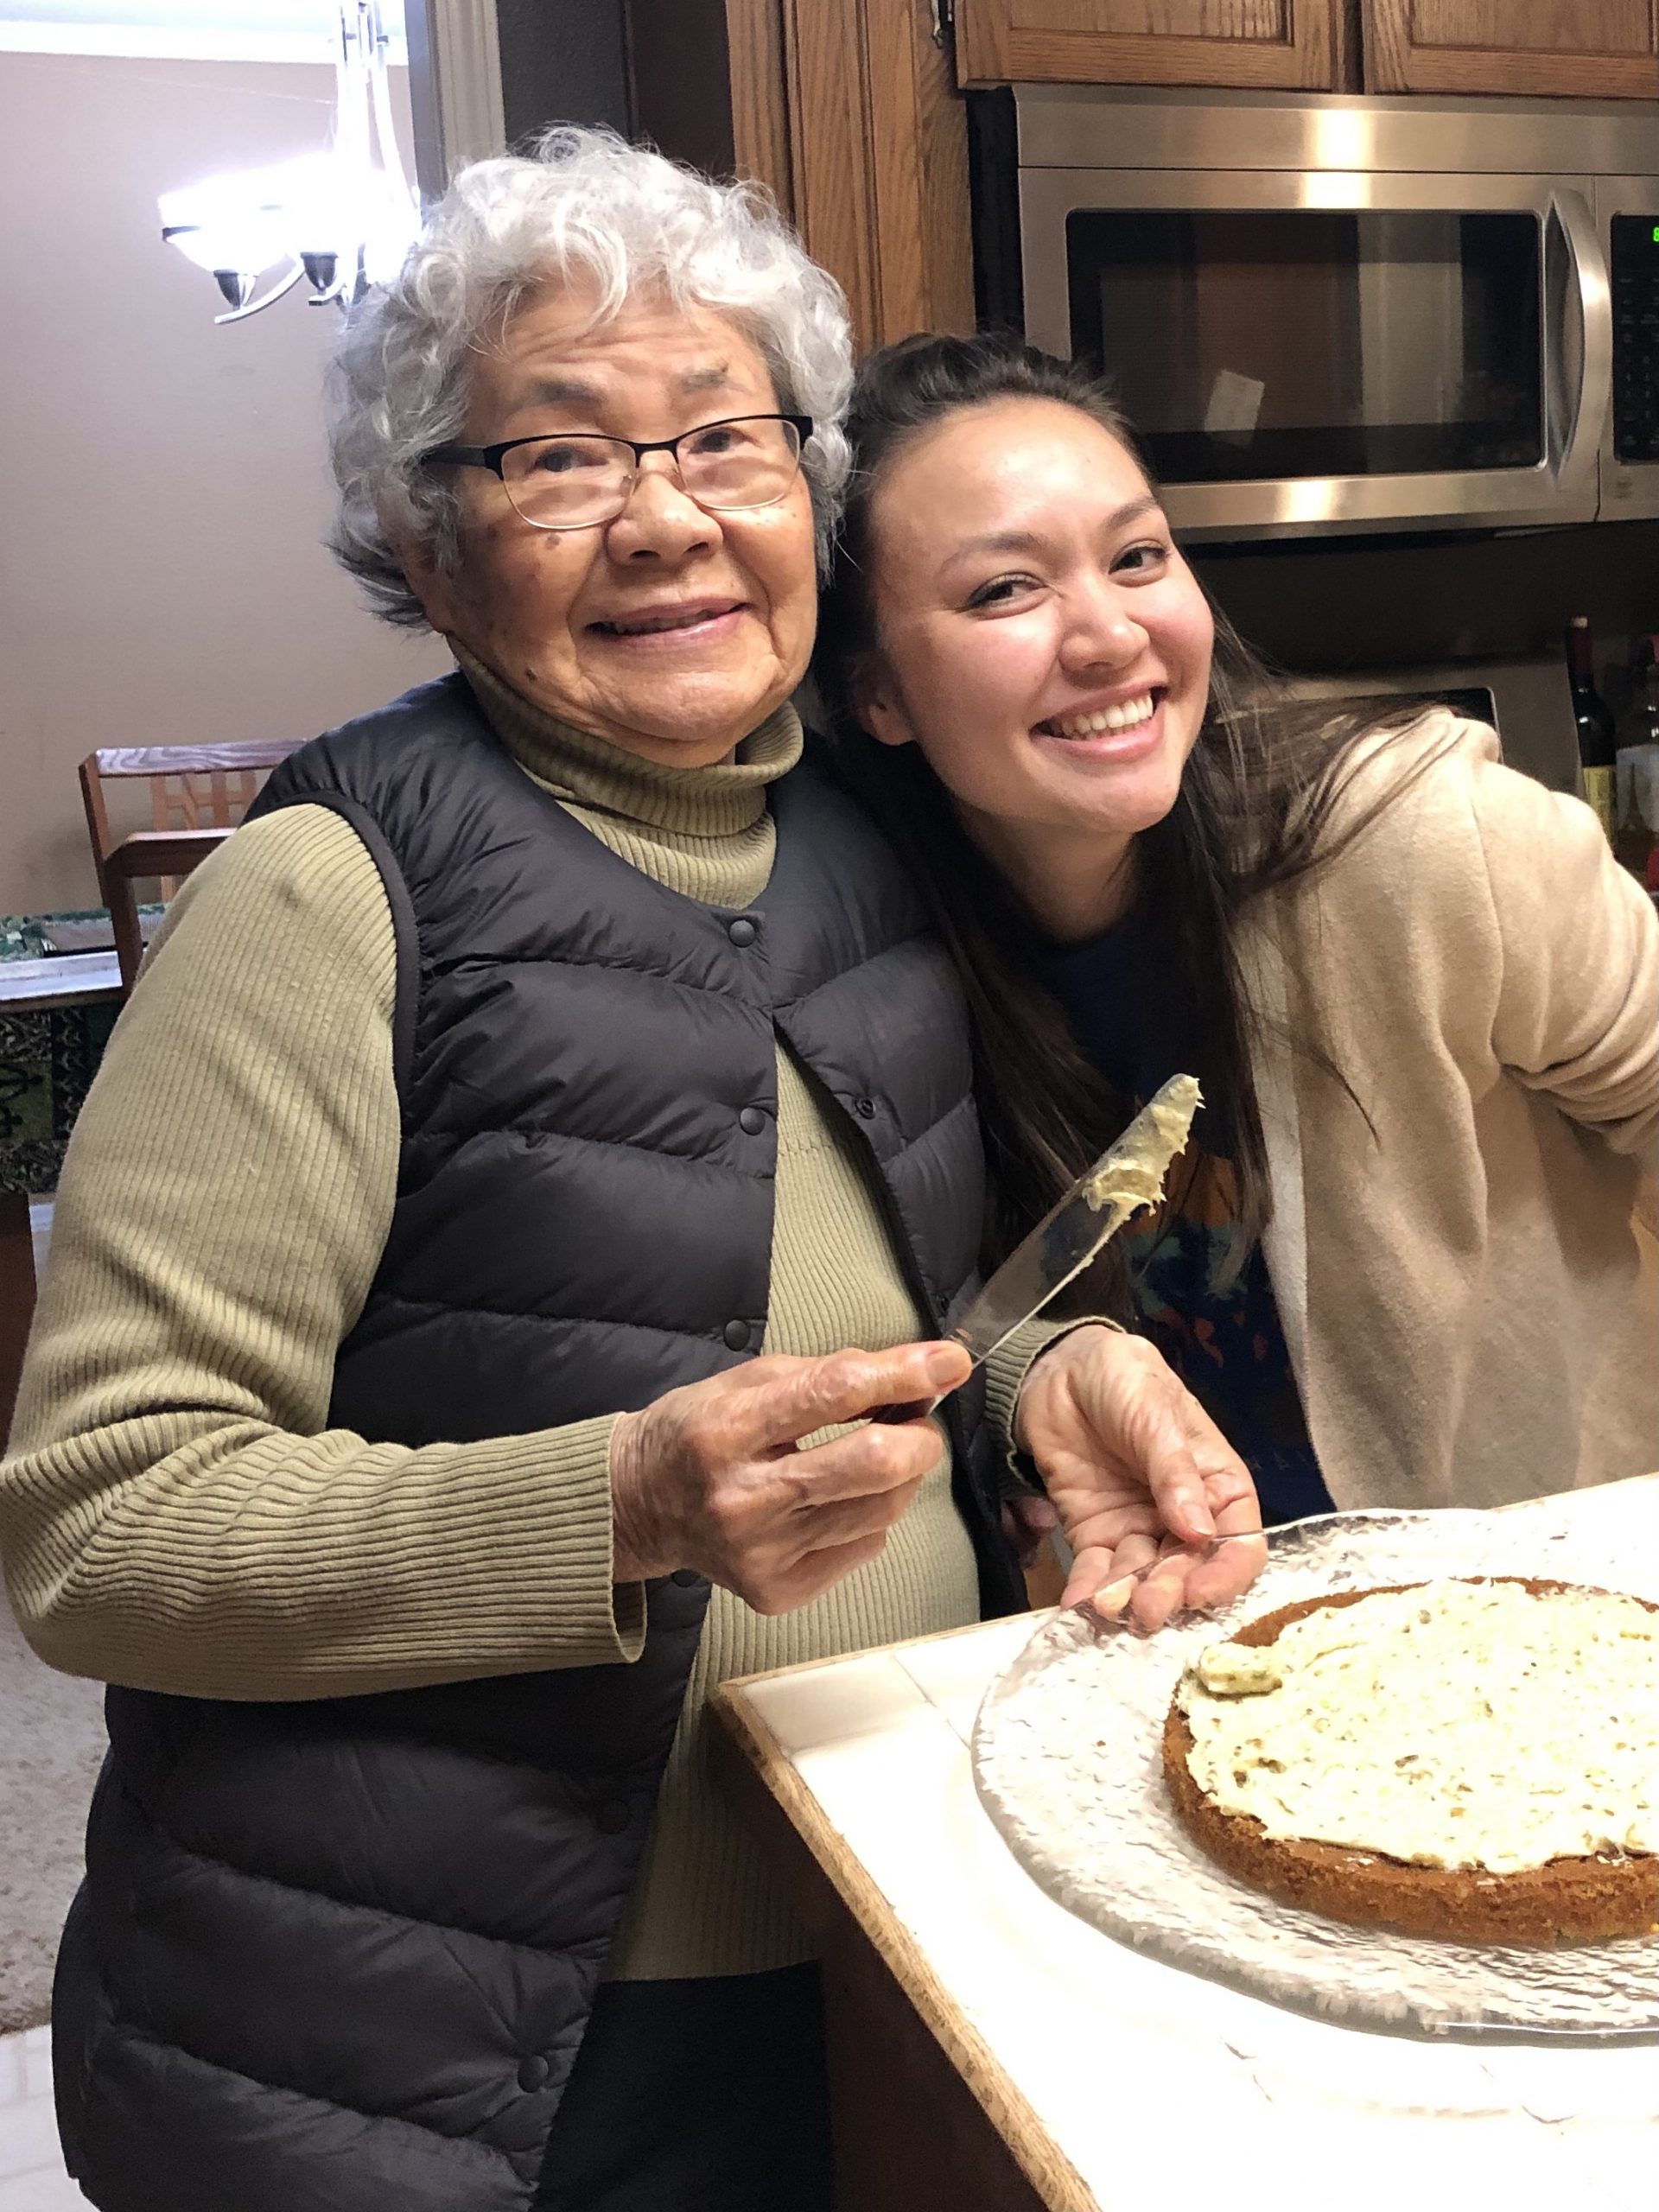 Annalise poses with her grandmother, an Asian woman with short, curly grey hair and glasses. They are making a cake together. 